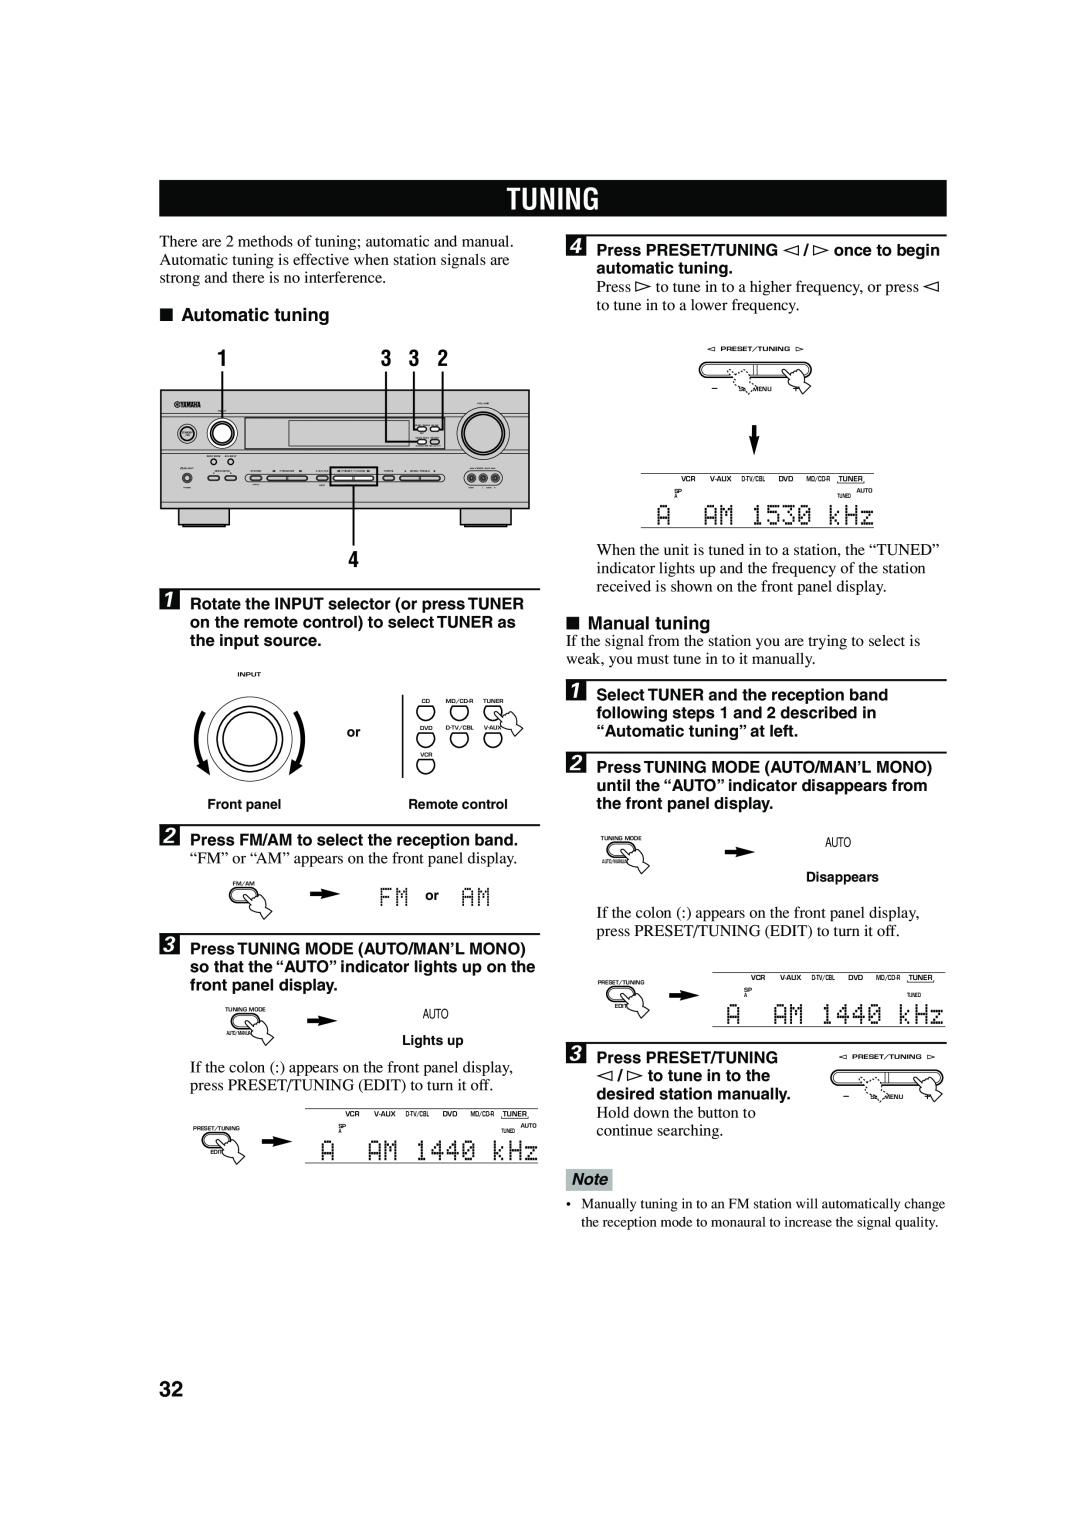 Yamaha HTR-5640 owner manual Tuning, AAM 1530 kHz, AM 1440 kHz, Automatic tuning, Manual tuning 